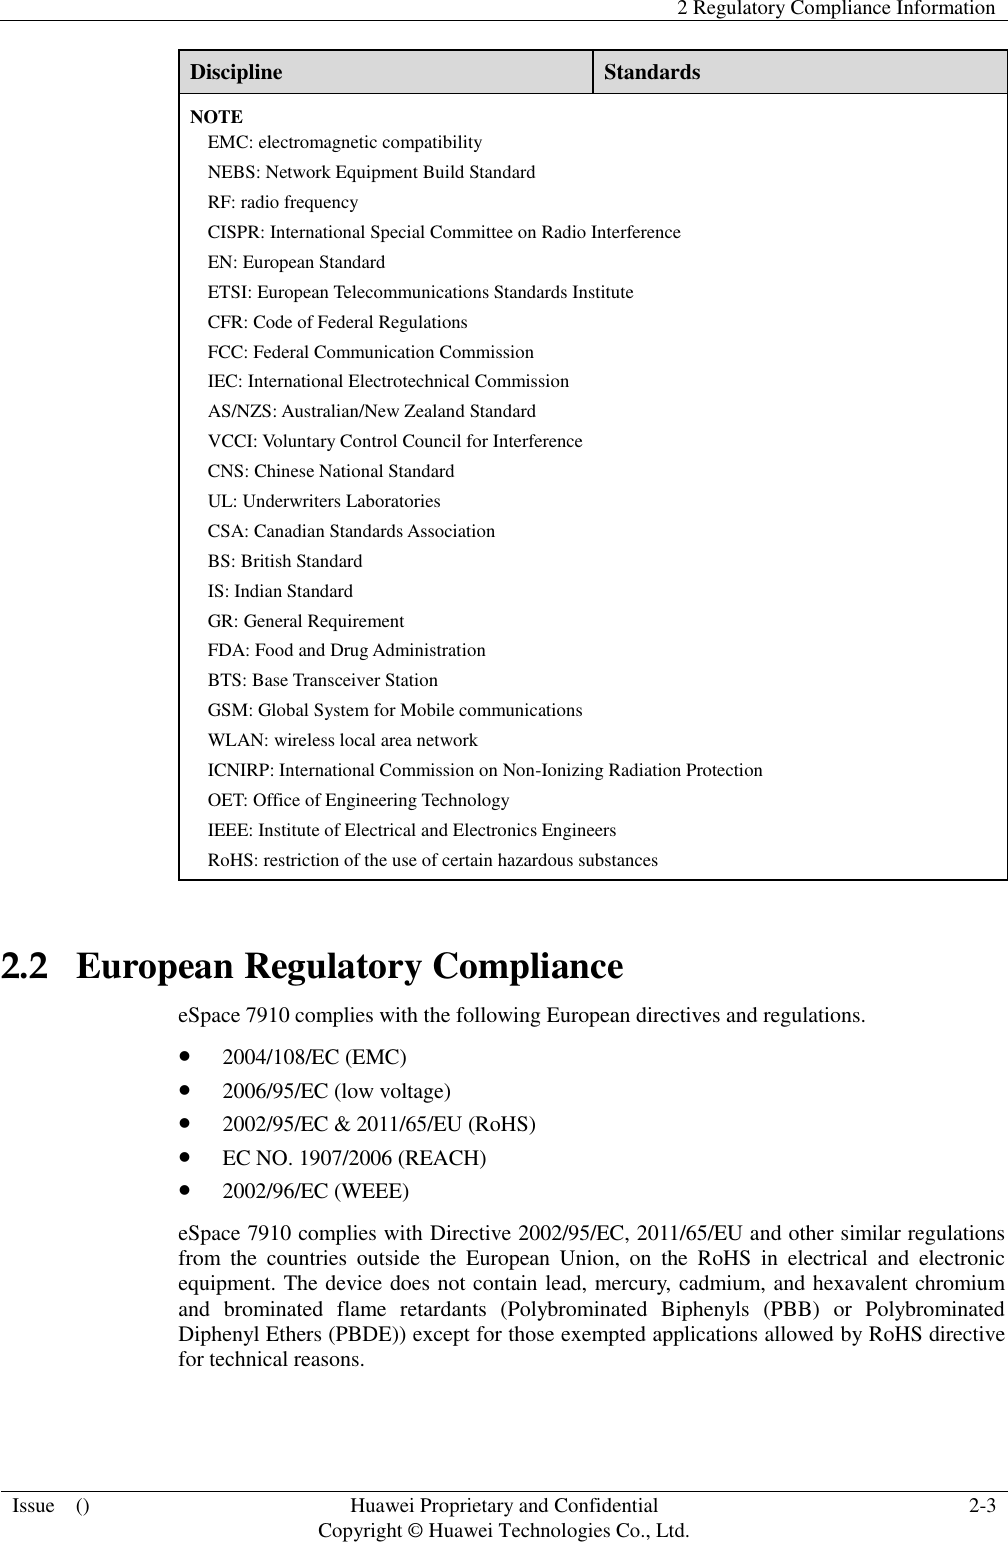   2 Regulatory Compliance Information  Issue    () Huawei Proprietary and Confidential                                     Copyright © Huawei Technologies Co., Ltd. 2-3  Discipline Standards NOTE EMC: electromagnetic compatibility NEBS: Network Equipment Build Standard RF: radio frequency CISPR: International Special Committee on Radio Interference EN: European Standard ETSI: European Telecommunications Standards Institute CFR: Code of Federal Regulations FCC: Federal Communication Commission IEC: International Electrotechnical Commission AS/NZS: Australian/New Zealand Standard VCCI: Voluntary Control Council for Interference CNS: Chinese National Standard UL: Underwriters Laboratories CSA: Canadian Standards Association BS: British Standard IS: Indian Standard GR: General Requirement FDA: Food and Drug Administration BTS: Base Transceiver Station GSM: Global System for Mobile communications WLAN: wireless local area network ICNIRP: International Commission on Non-Ionizing Radiation Protection OET: Office of Engineering Technology IEEE: Institute of Electrical and Electronics Engineers RoHS: restriction of the use of certain hazardous substances 2.2   European Regulatory Compliance eSpace 7910 complies with the following European directives and regulations.  2004/108/EC (EMC)  2006/95/EC (low voltage)  2002/95/EC &amp; 2011/65/EU (RoHS)  EC NO. 1907/2006 (REACH)  2002/96/EC (WEEE) eSpace 7910 complies with Directive 2002/95/EC, 2011/65/EU and other similar regulations from  the  countries  outside  the  European  Union,  on  the  RoHS  in  electrical  and  electronic equipment. The device does not contain lead, mercury, cadmium, and hexavalent chromium and  brominated  flame  retardants  (Polybrominated  Biphenyls  (PBB)  or  Polybrominated Diphenyl Ethers (PBDE)) except for those exempted applications allowed by RoHS directive for technical reasons.   